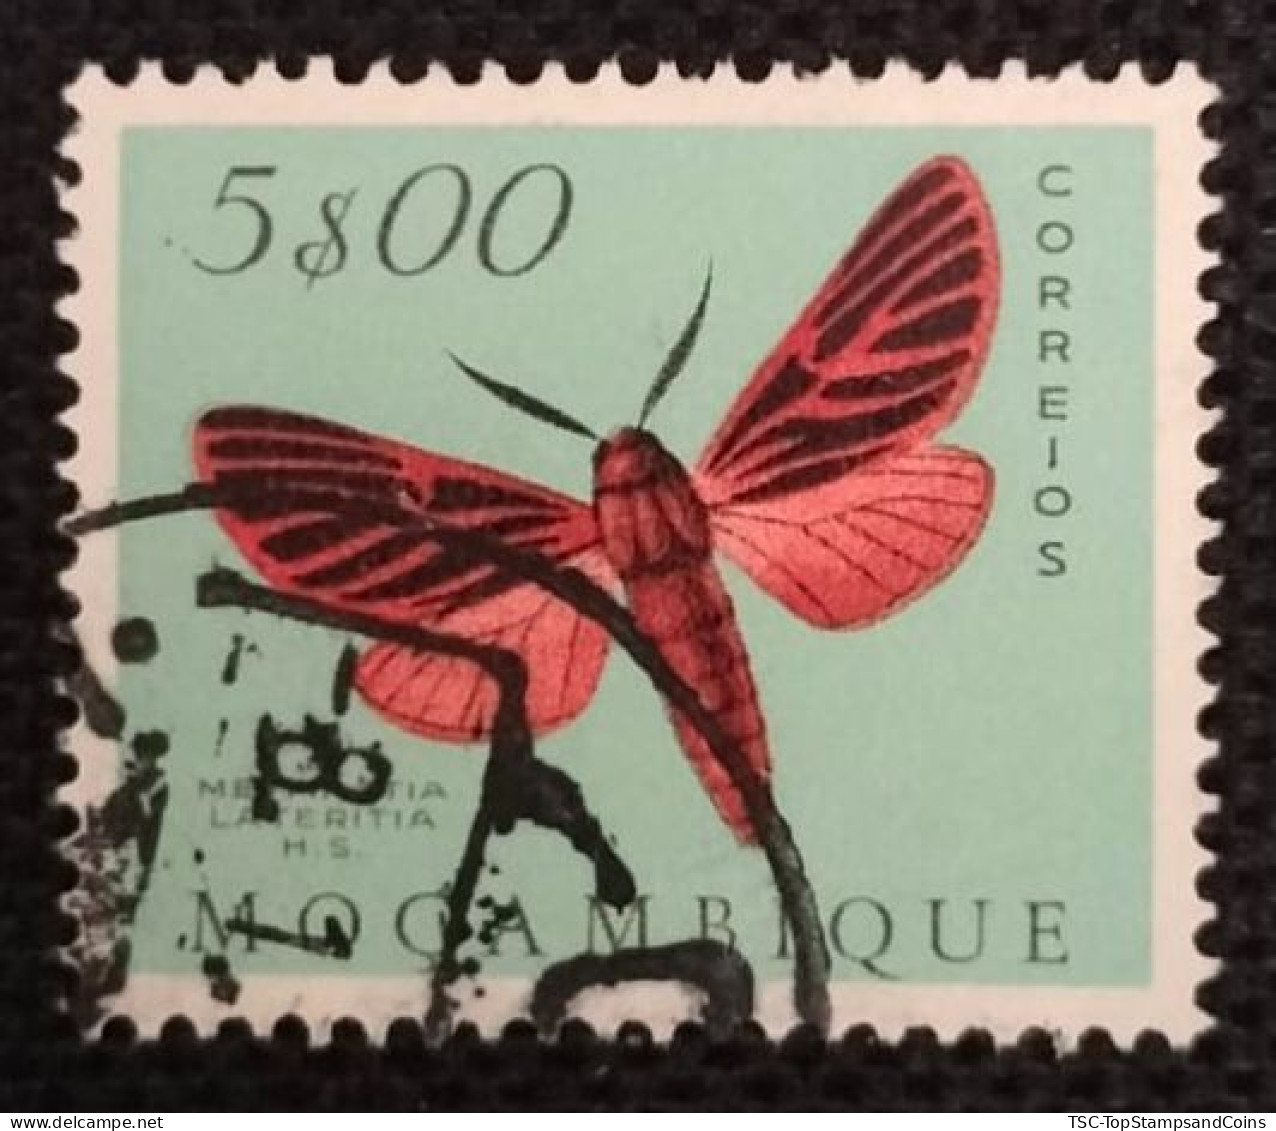 MOZPO0403UG - Mozambique Butterflies  - 5$00 Used Stamp - Mozambique - 1953 - Mosambik